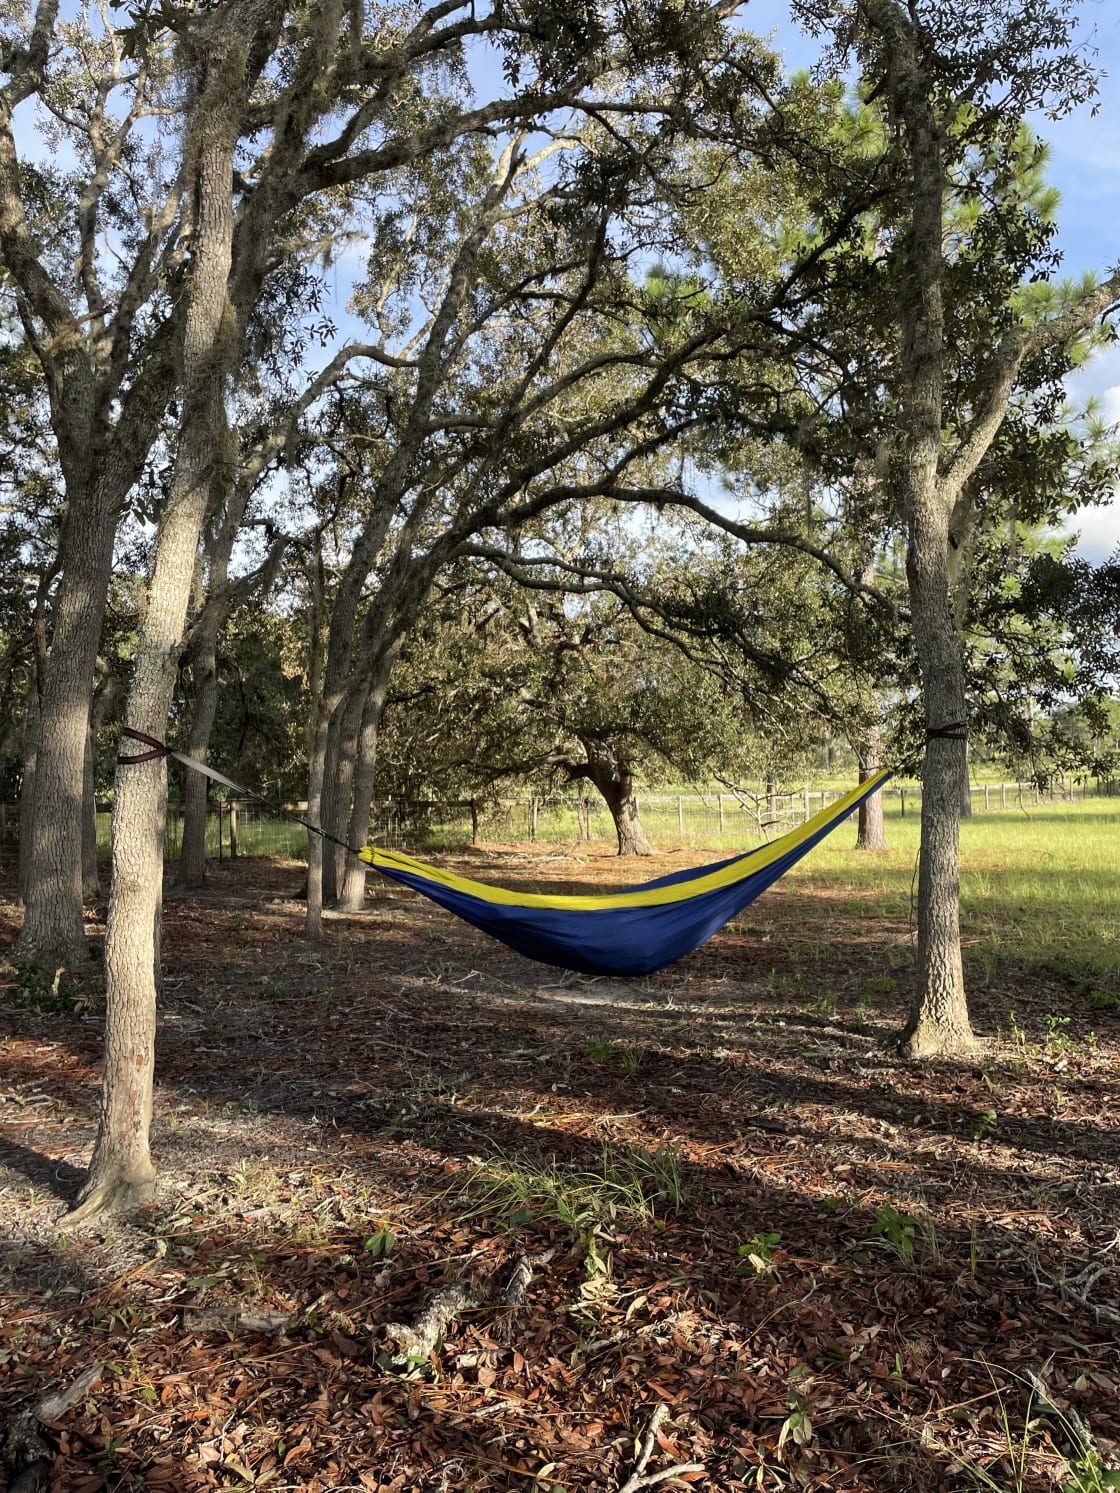 The Dune Sunflower campsite has a lot of trees which are great for hanging up hammocks!